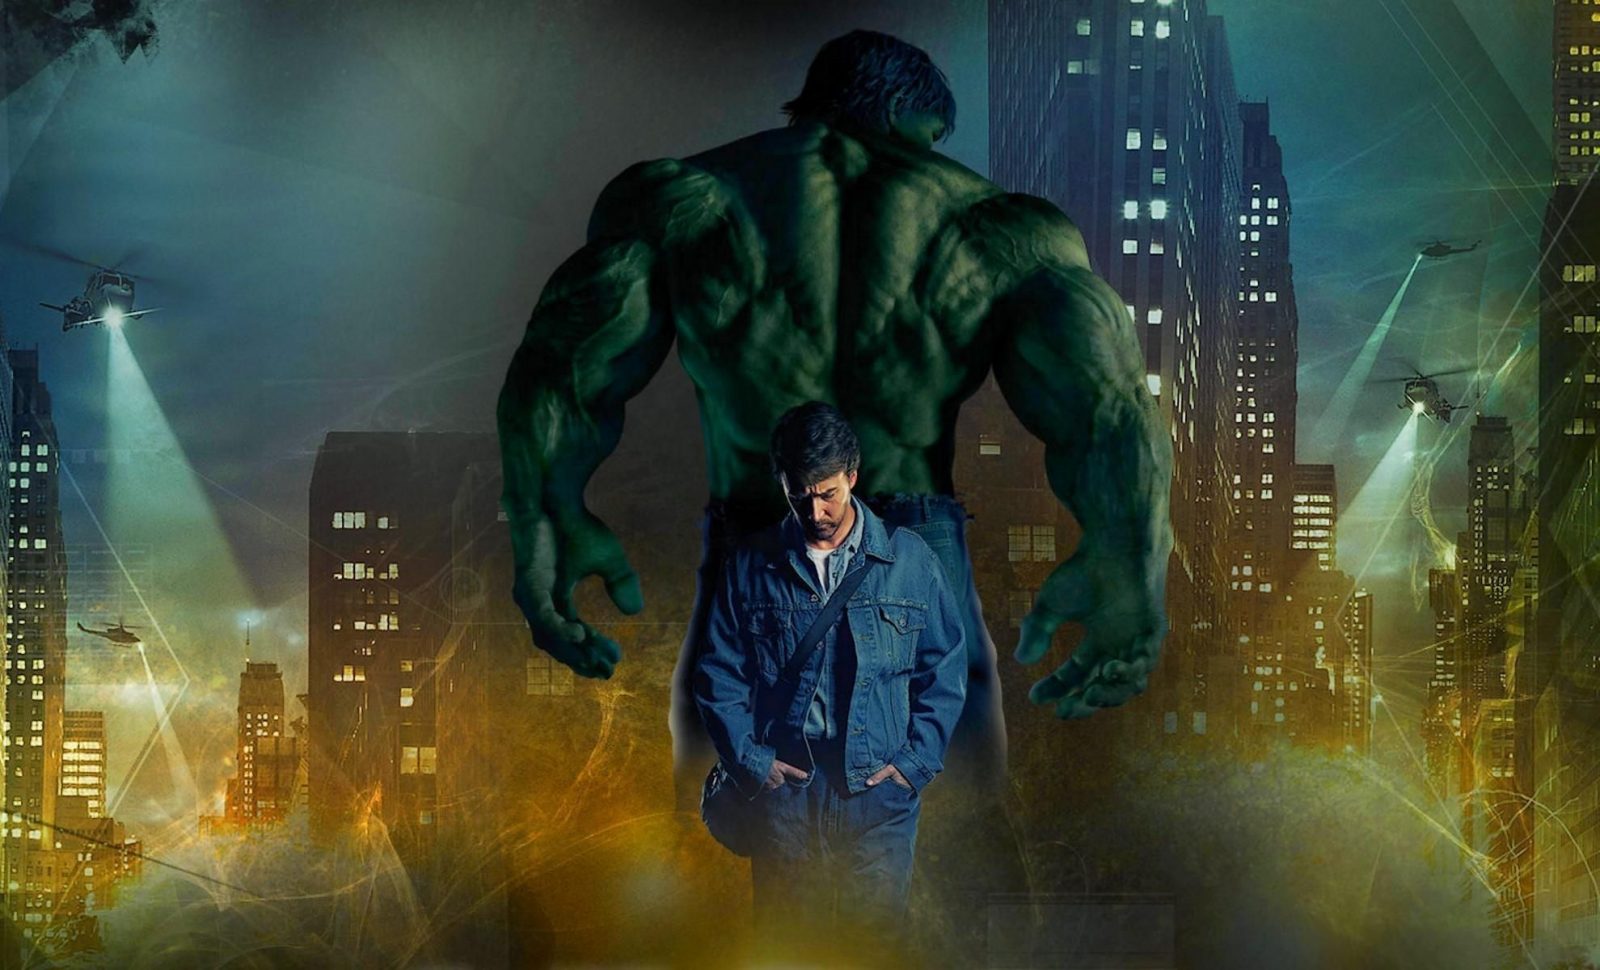 There Are 23 Movies Set in the Marvel Cinematic Universe — How Many Have You Seen? The Incredible Hulk (2008)